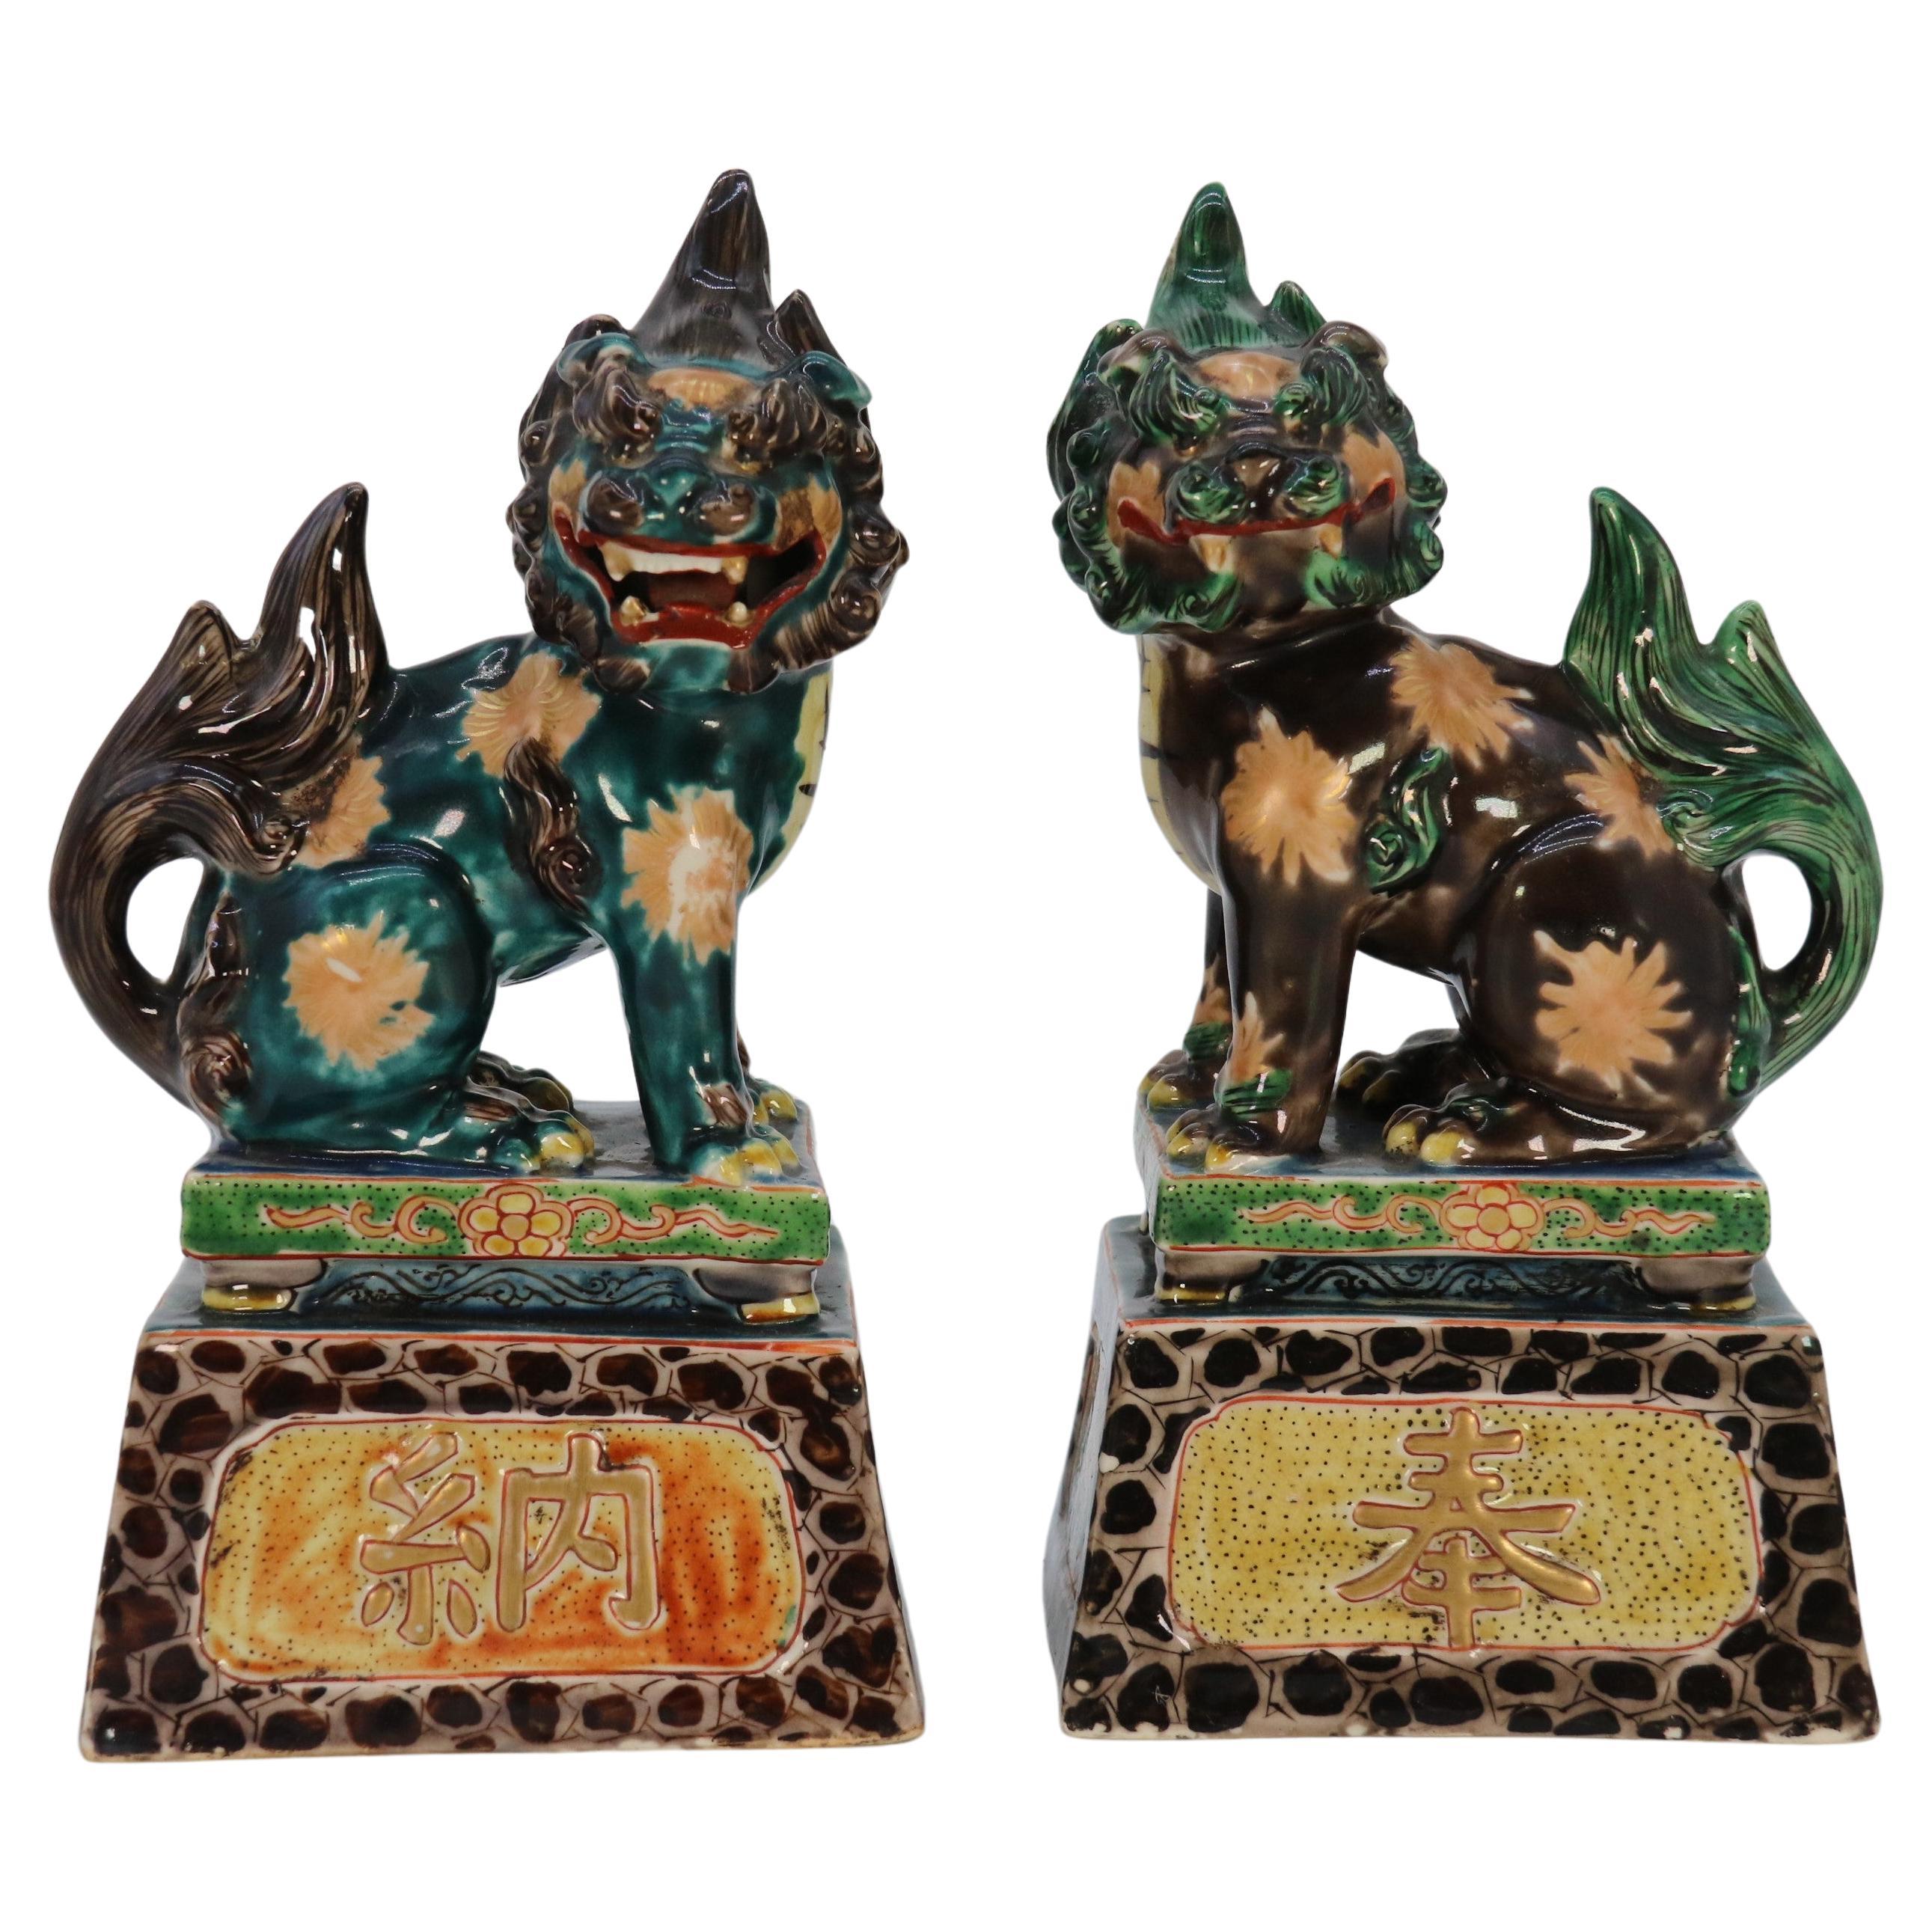 A highly decorative pair of Chinese pottery Buddhist lions circa 1900. For Sale